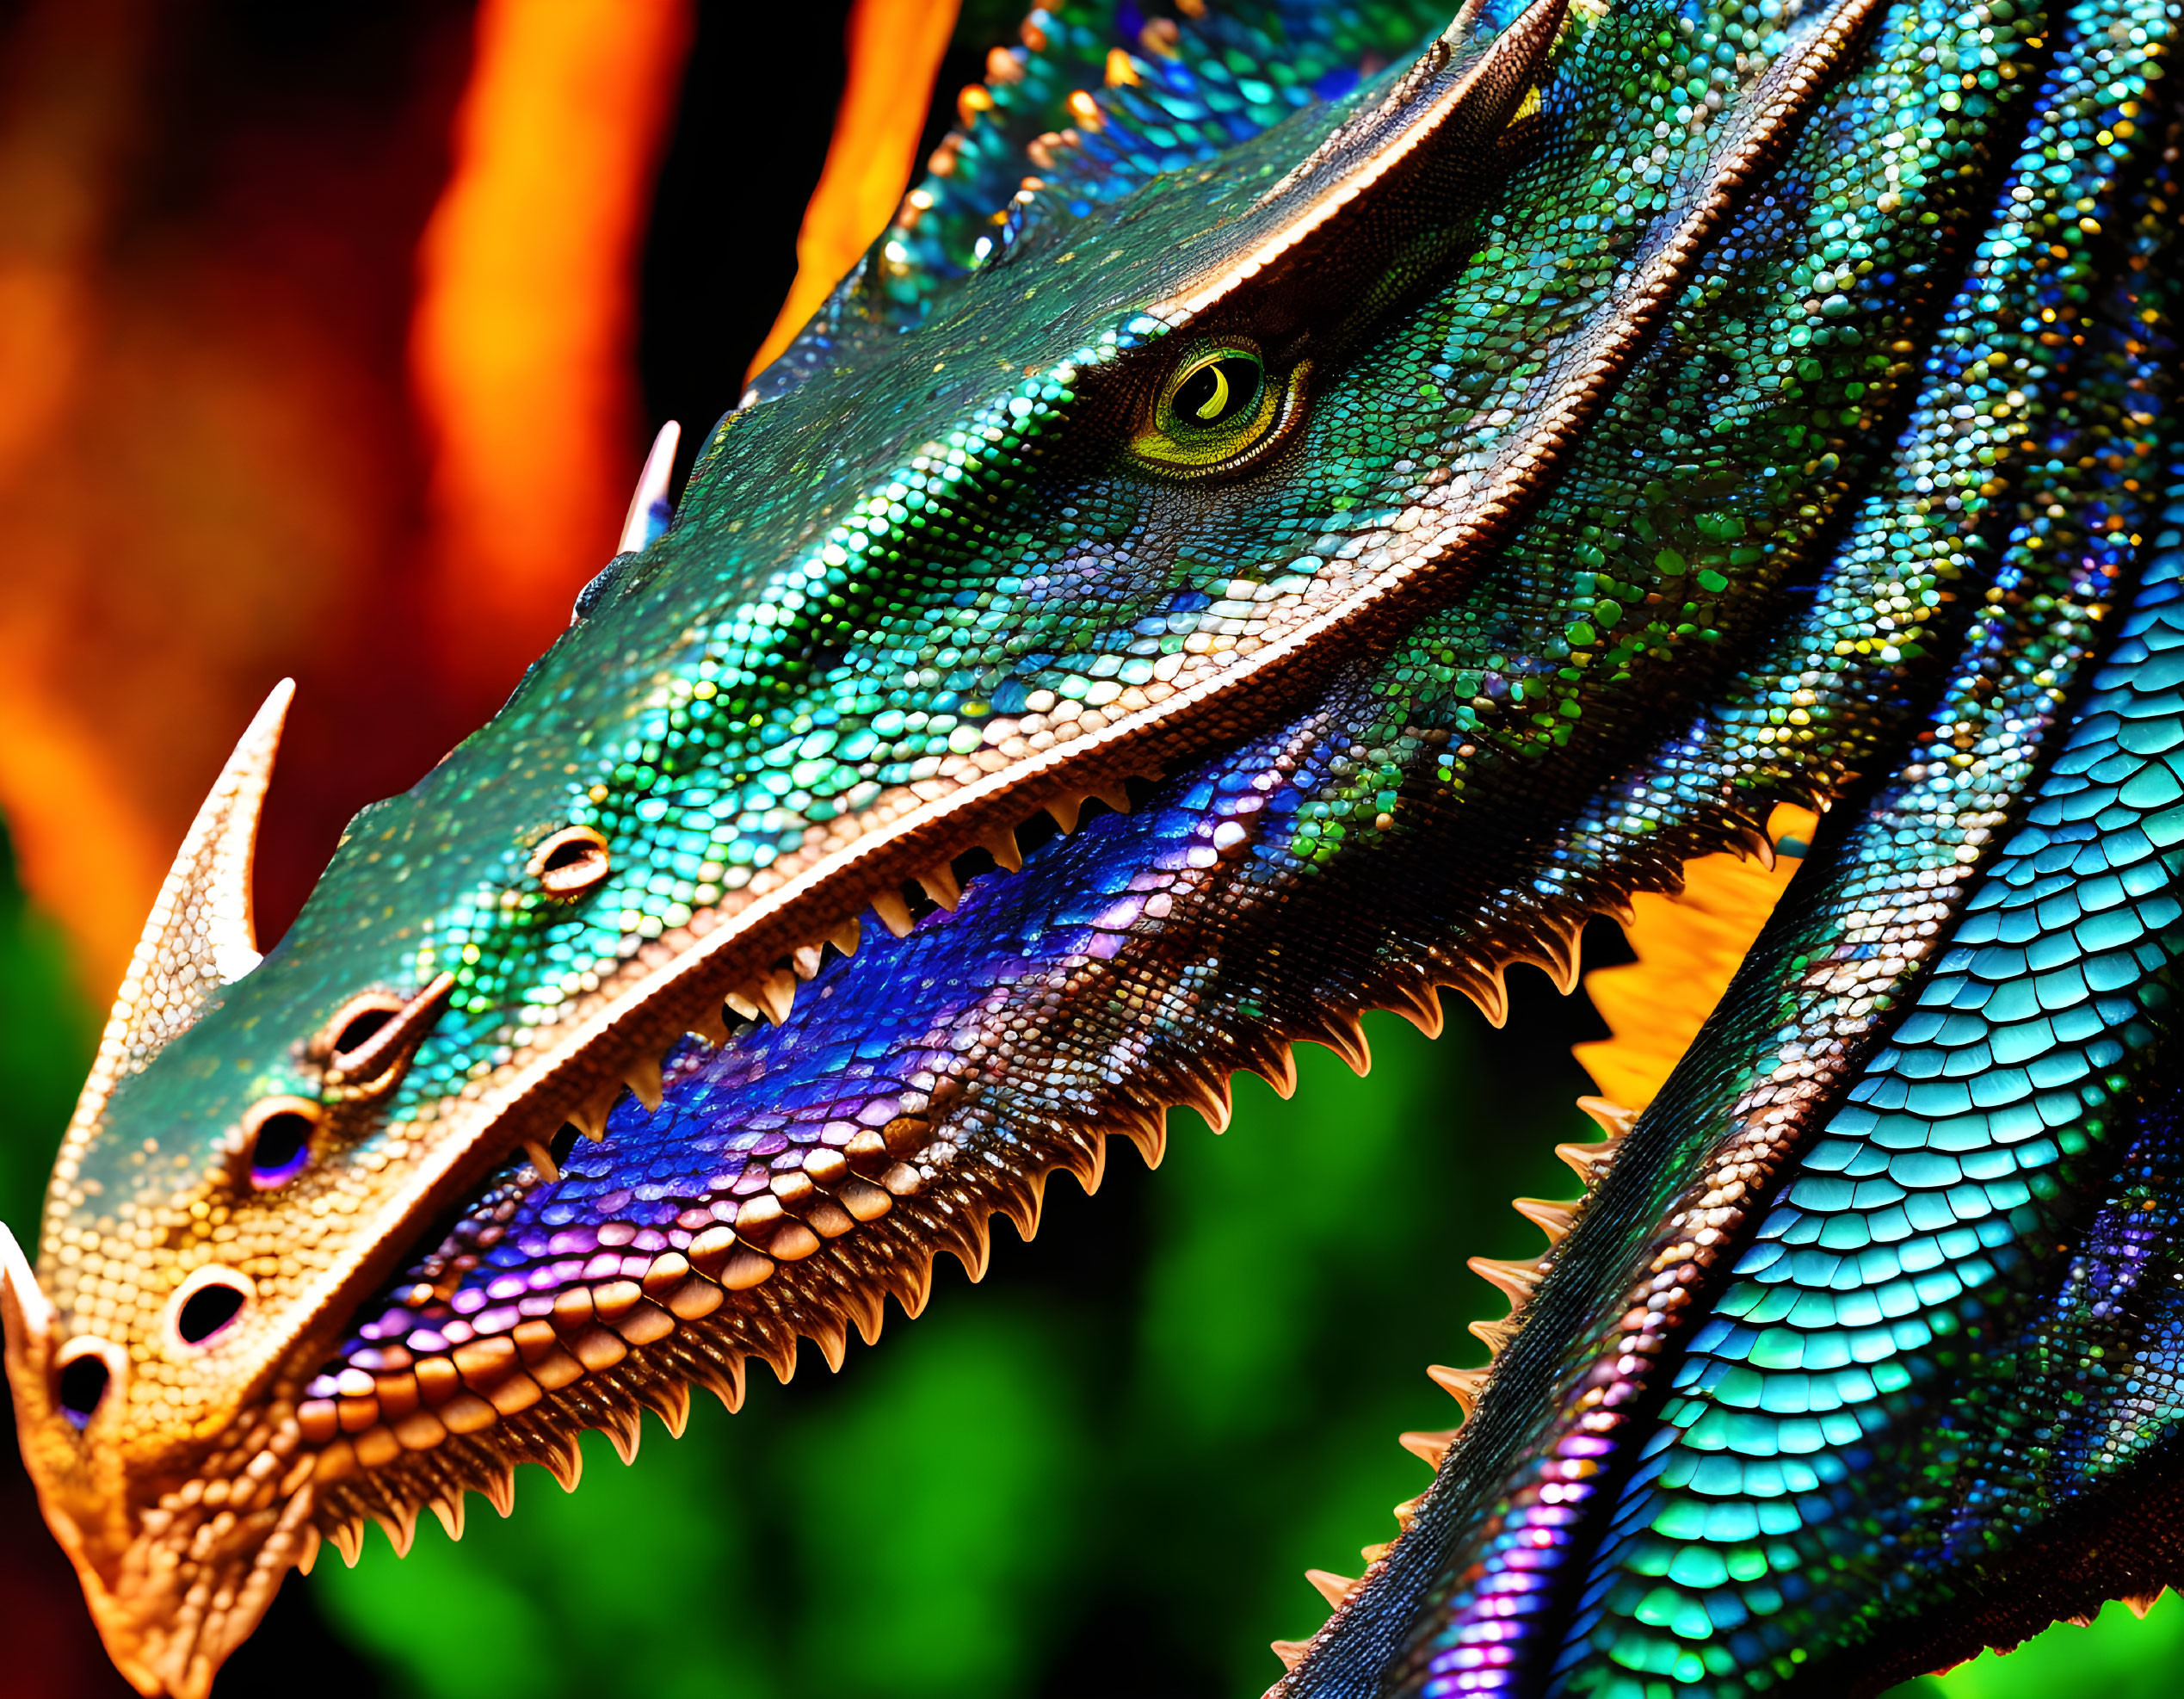 Colorful Dragon Model with Blue and Green Scales and Yellow Eye